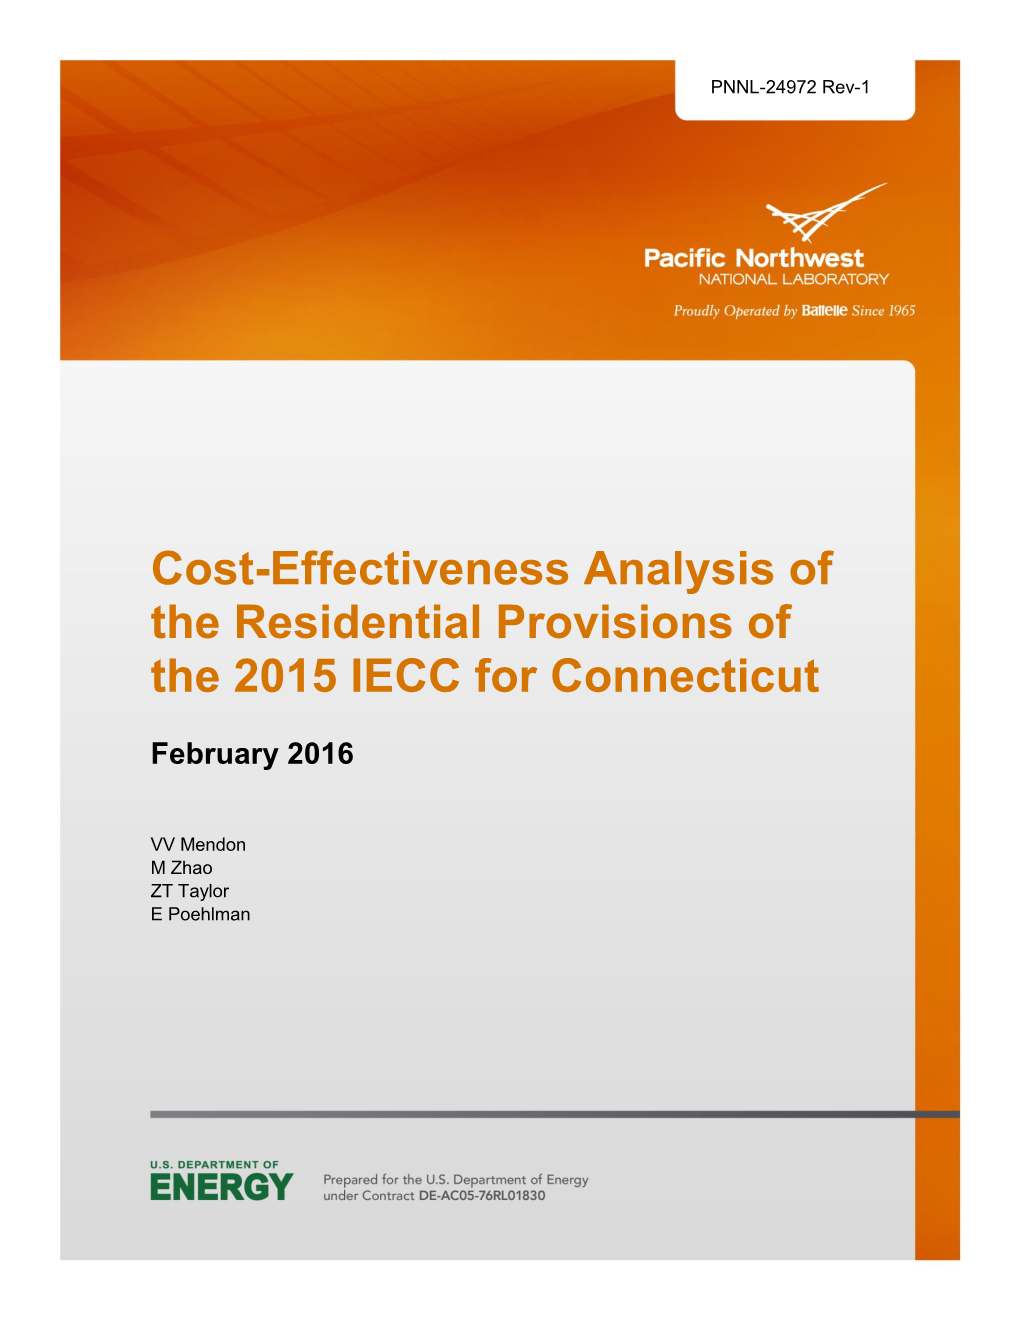 Cost-Effectiveness Analysis of the Residential Provisions of the 2015 IECC for Connecticut